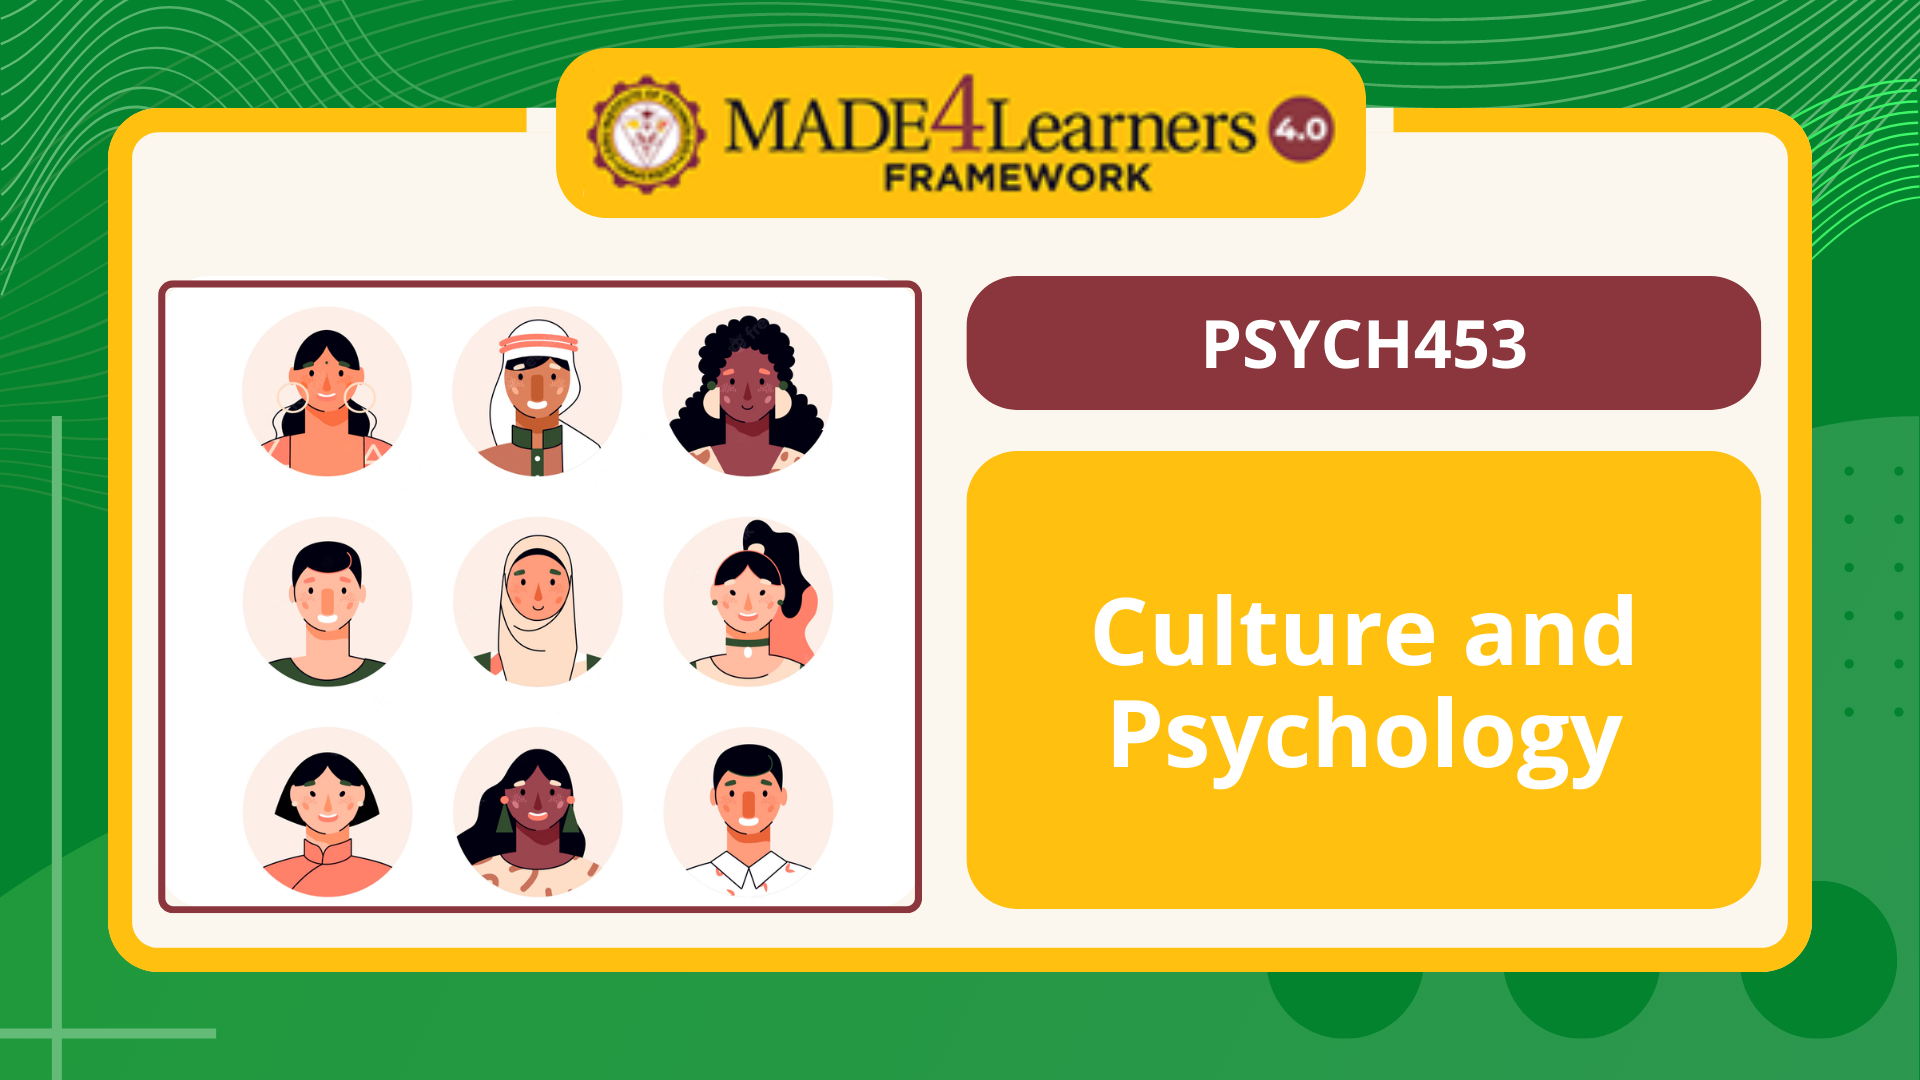 PSYCH453 Culture and Psychology - E1.C1